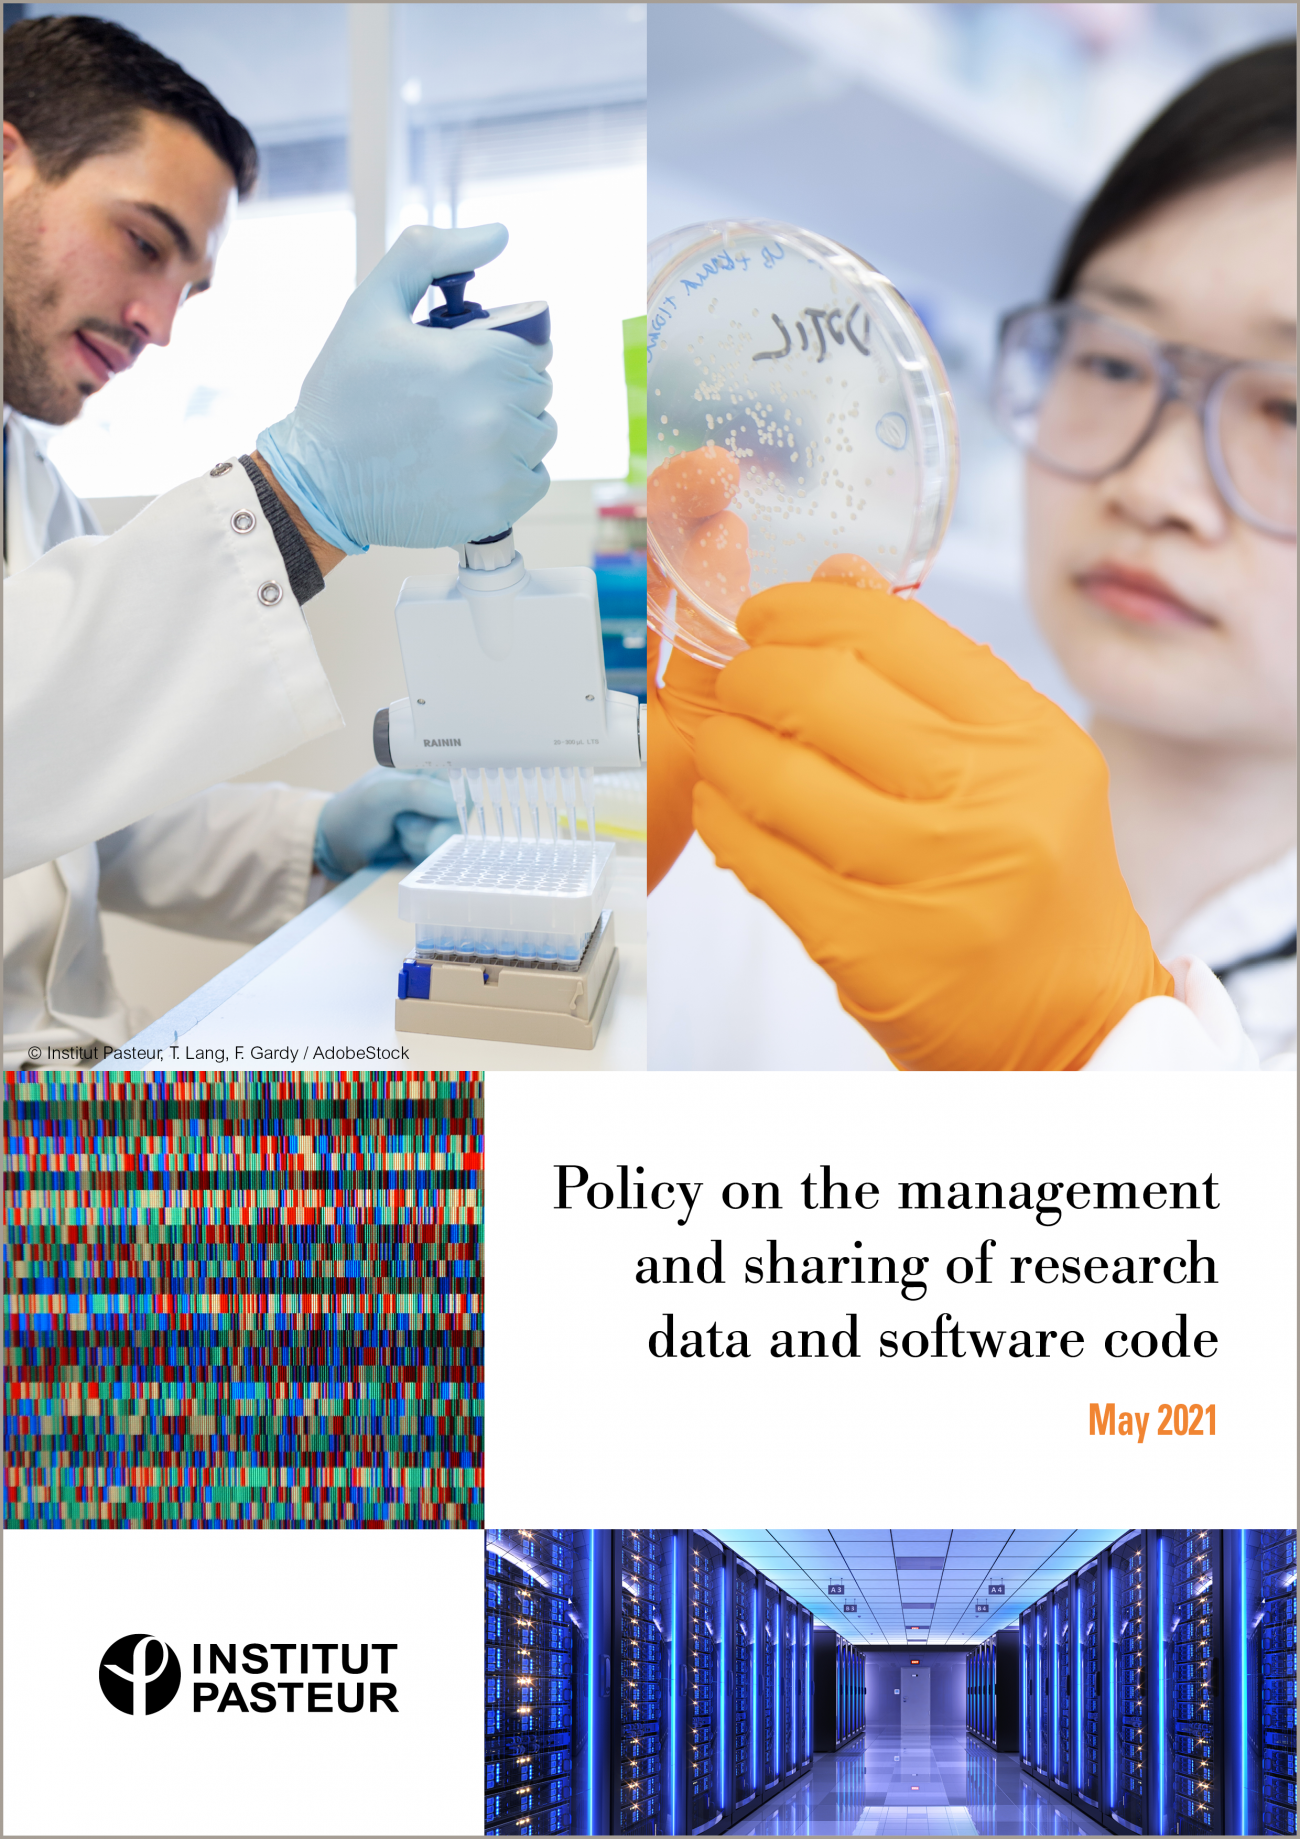 Institut Pasteur - Policy for the management and sharing of research data and software code